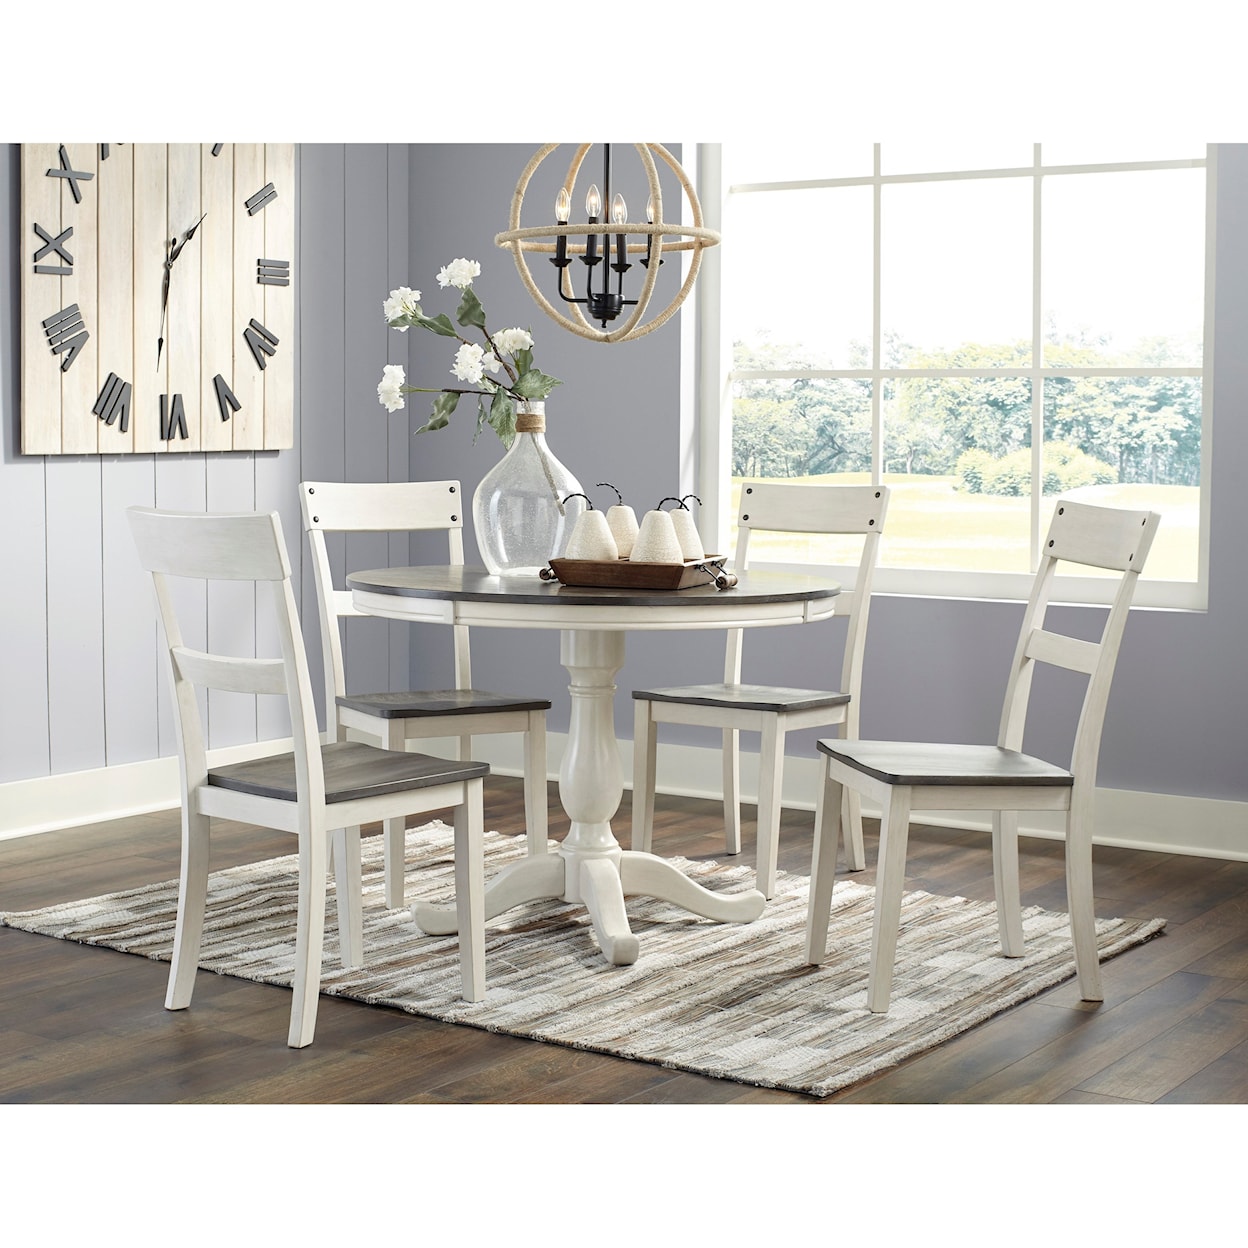 Signature Design by Ashley Nelling Dining Room Table